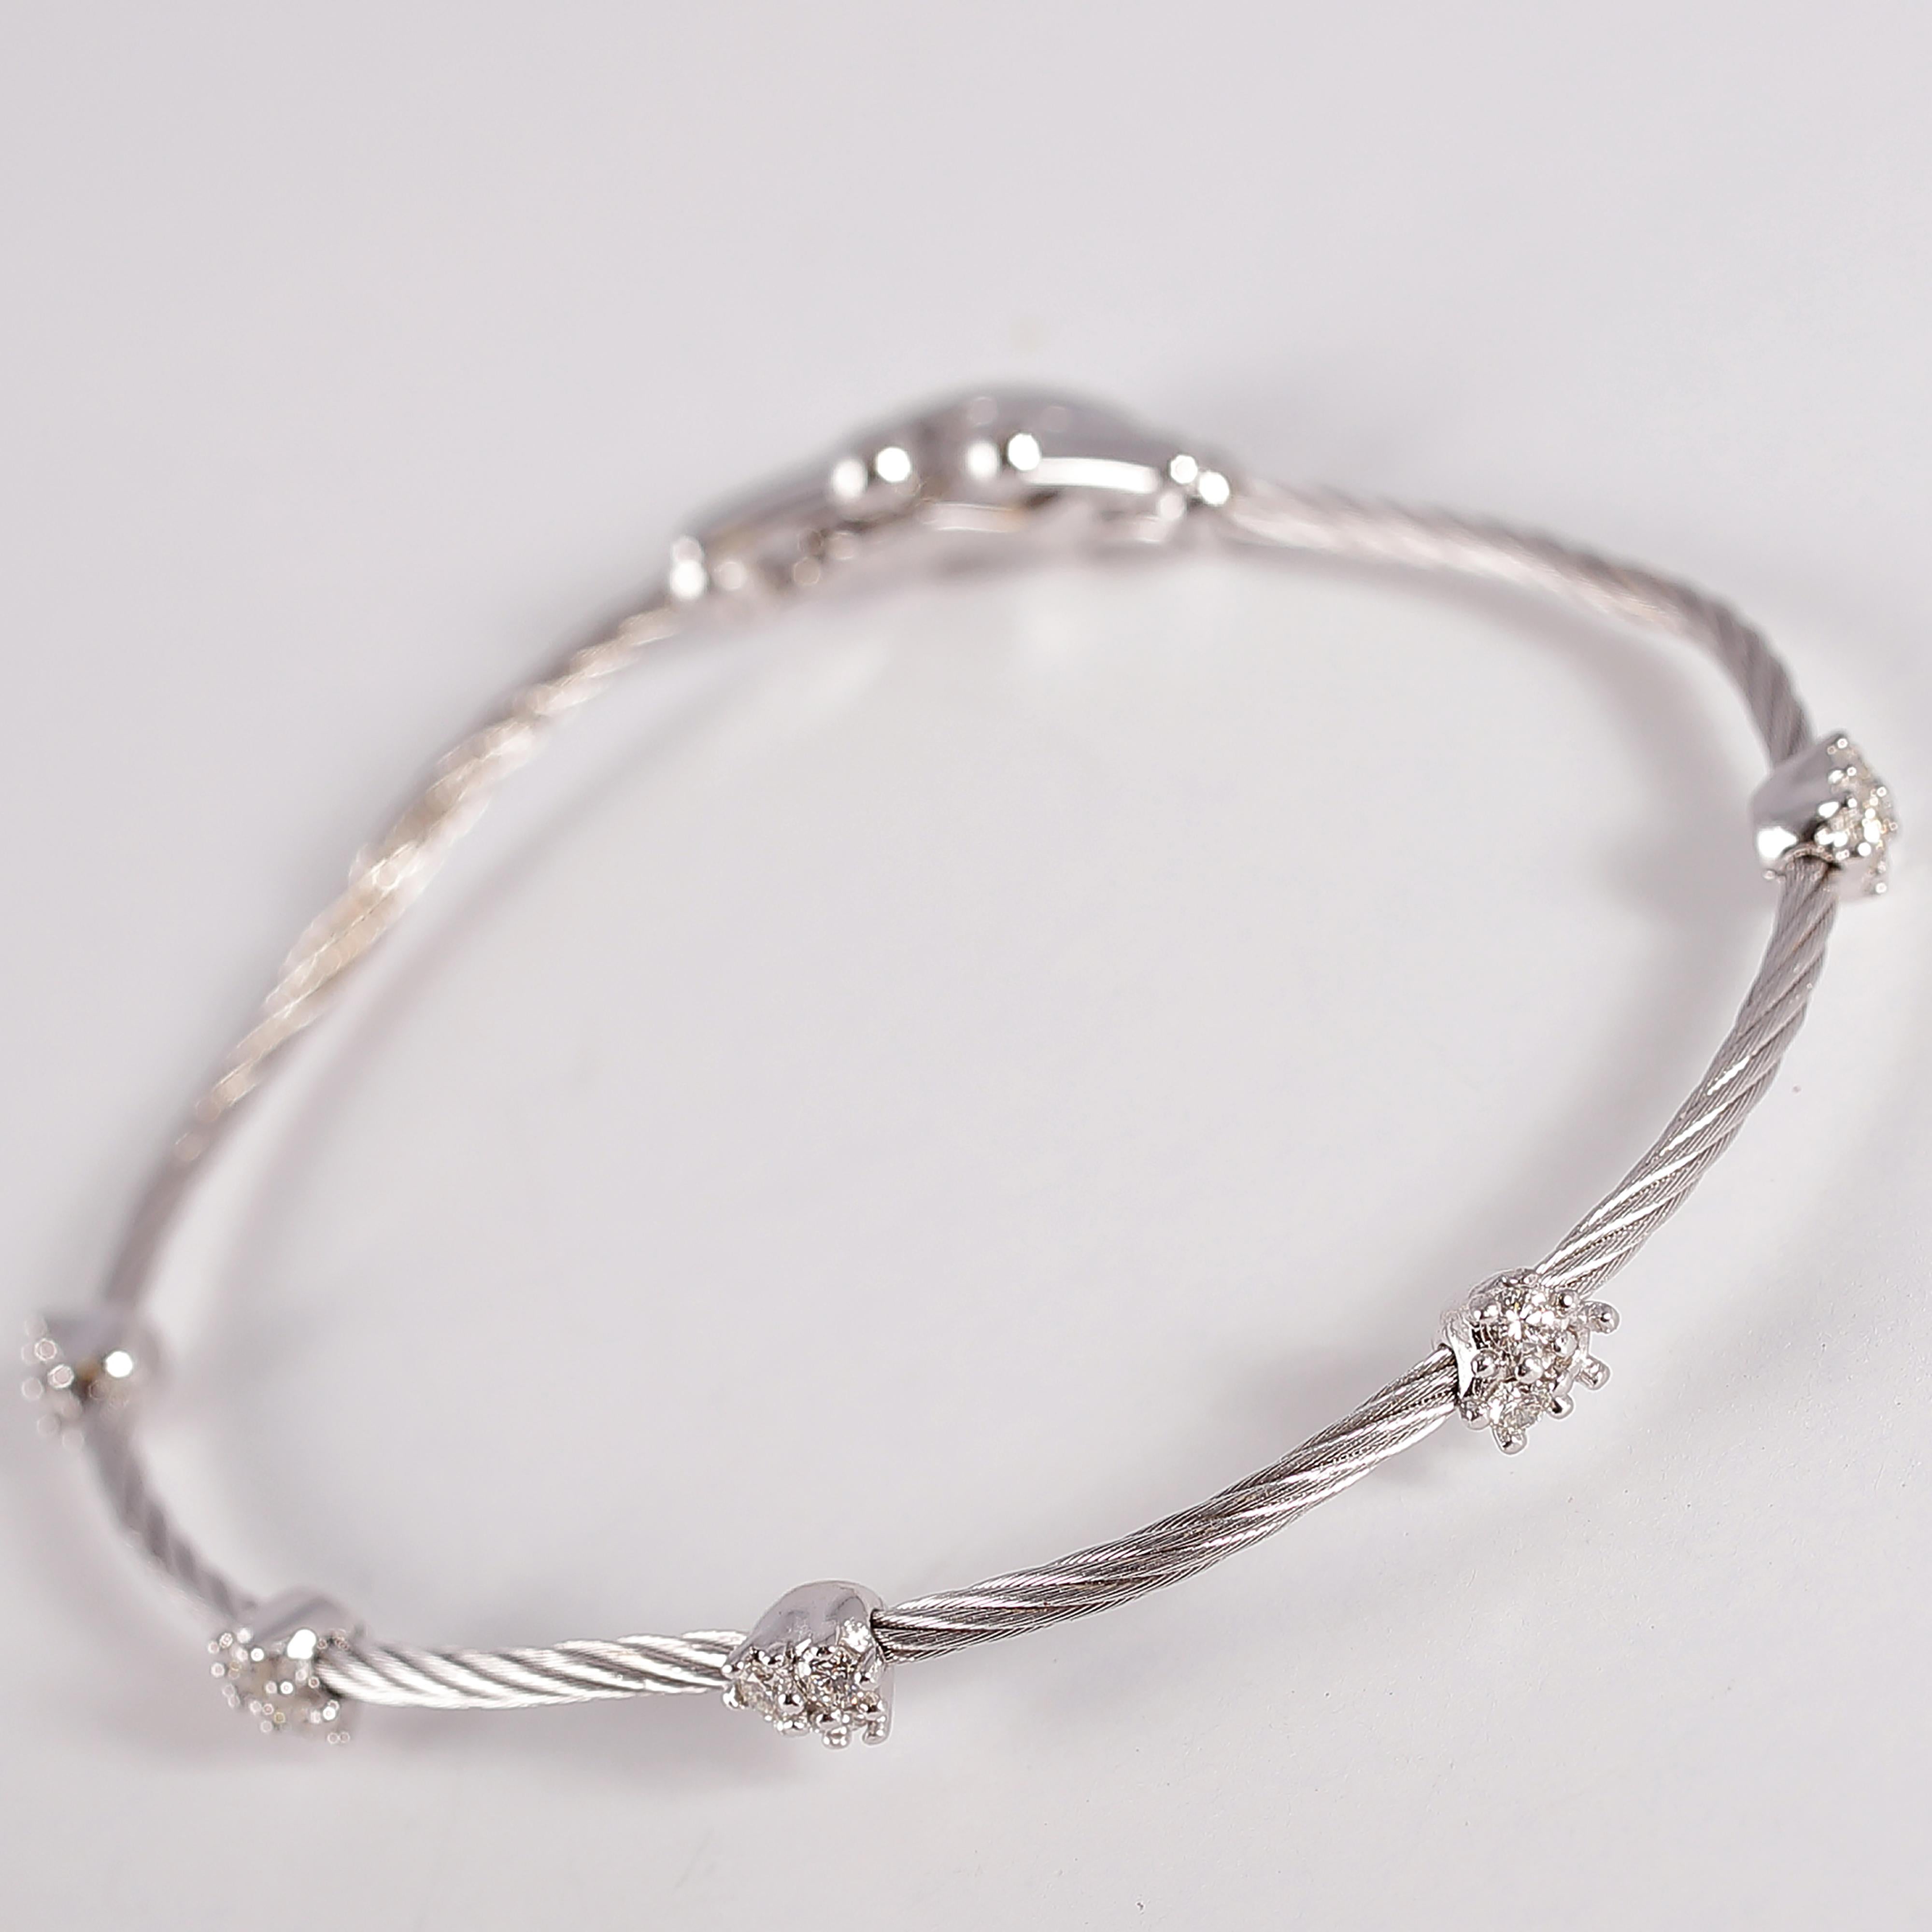 Wear one or several for a nice crisp look! Composed of 18 karat white gold, this bracelet features clusters of diamonds, with an approximate total weight of 0.35 carats.